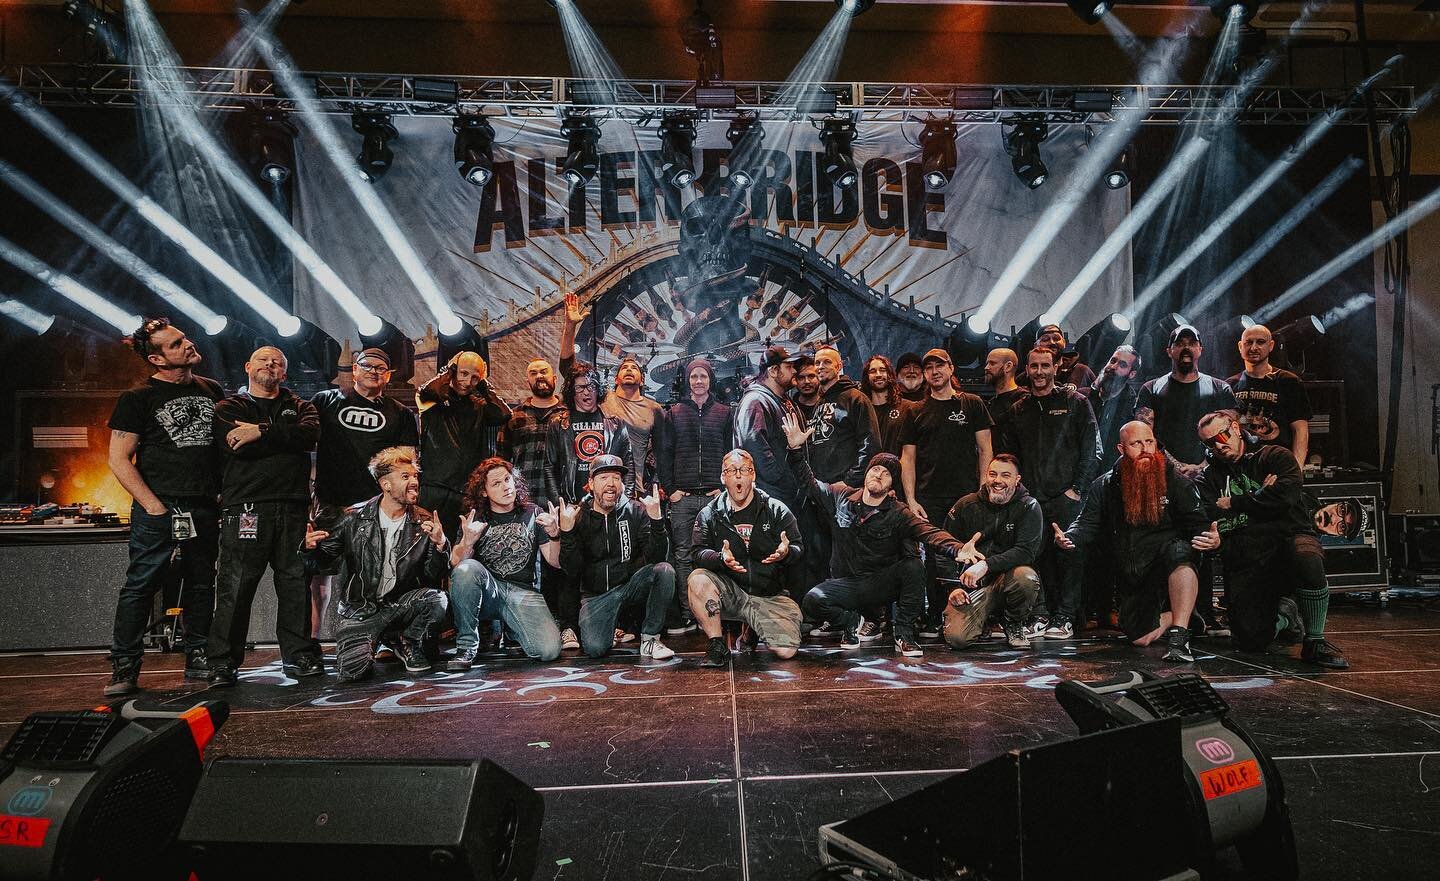 Leg 2 complete @officialalterbridge @mammothwvh @pistolsatdawnofficial 

An amazing tour with amazing artists and a stellar crew. 🔥 Check out Alter Bridge - Pawns &amp; Kings out now and preorder Mammoth WVH - Mammoth II due out August 4. 

See all 